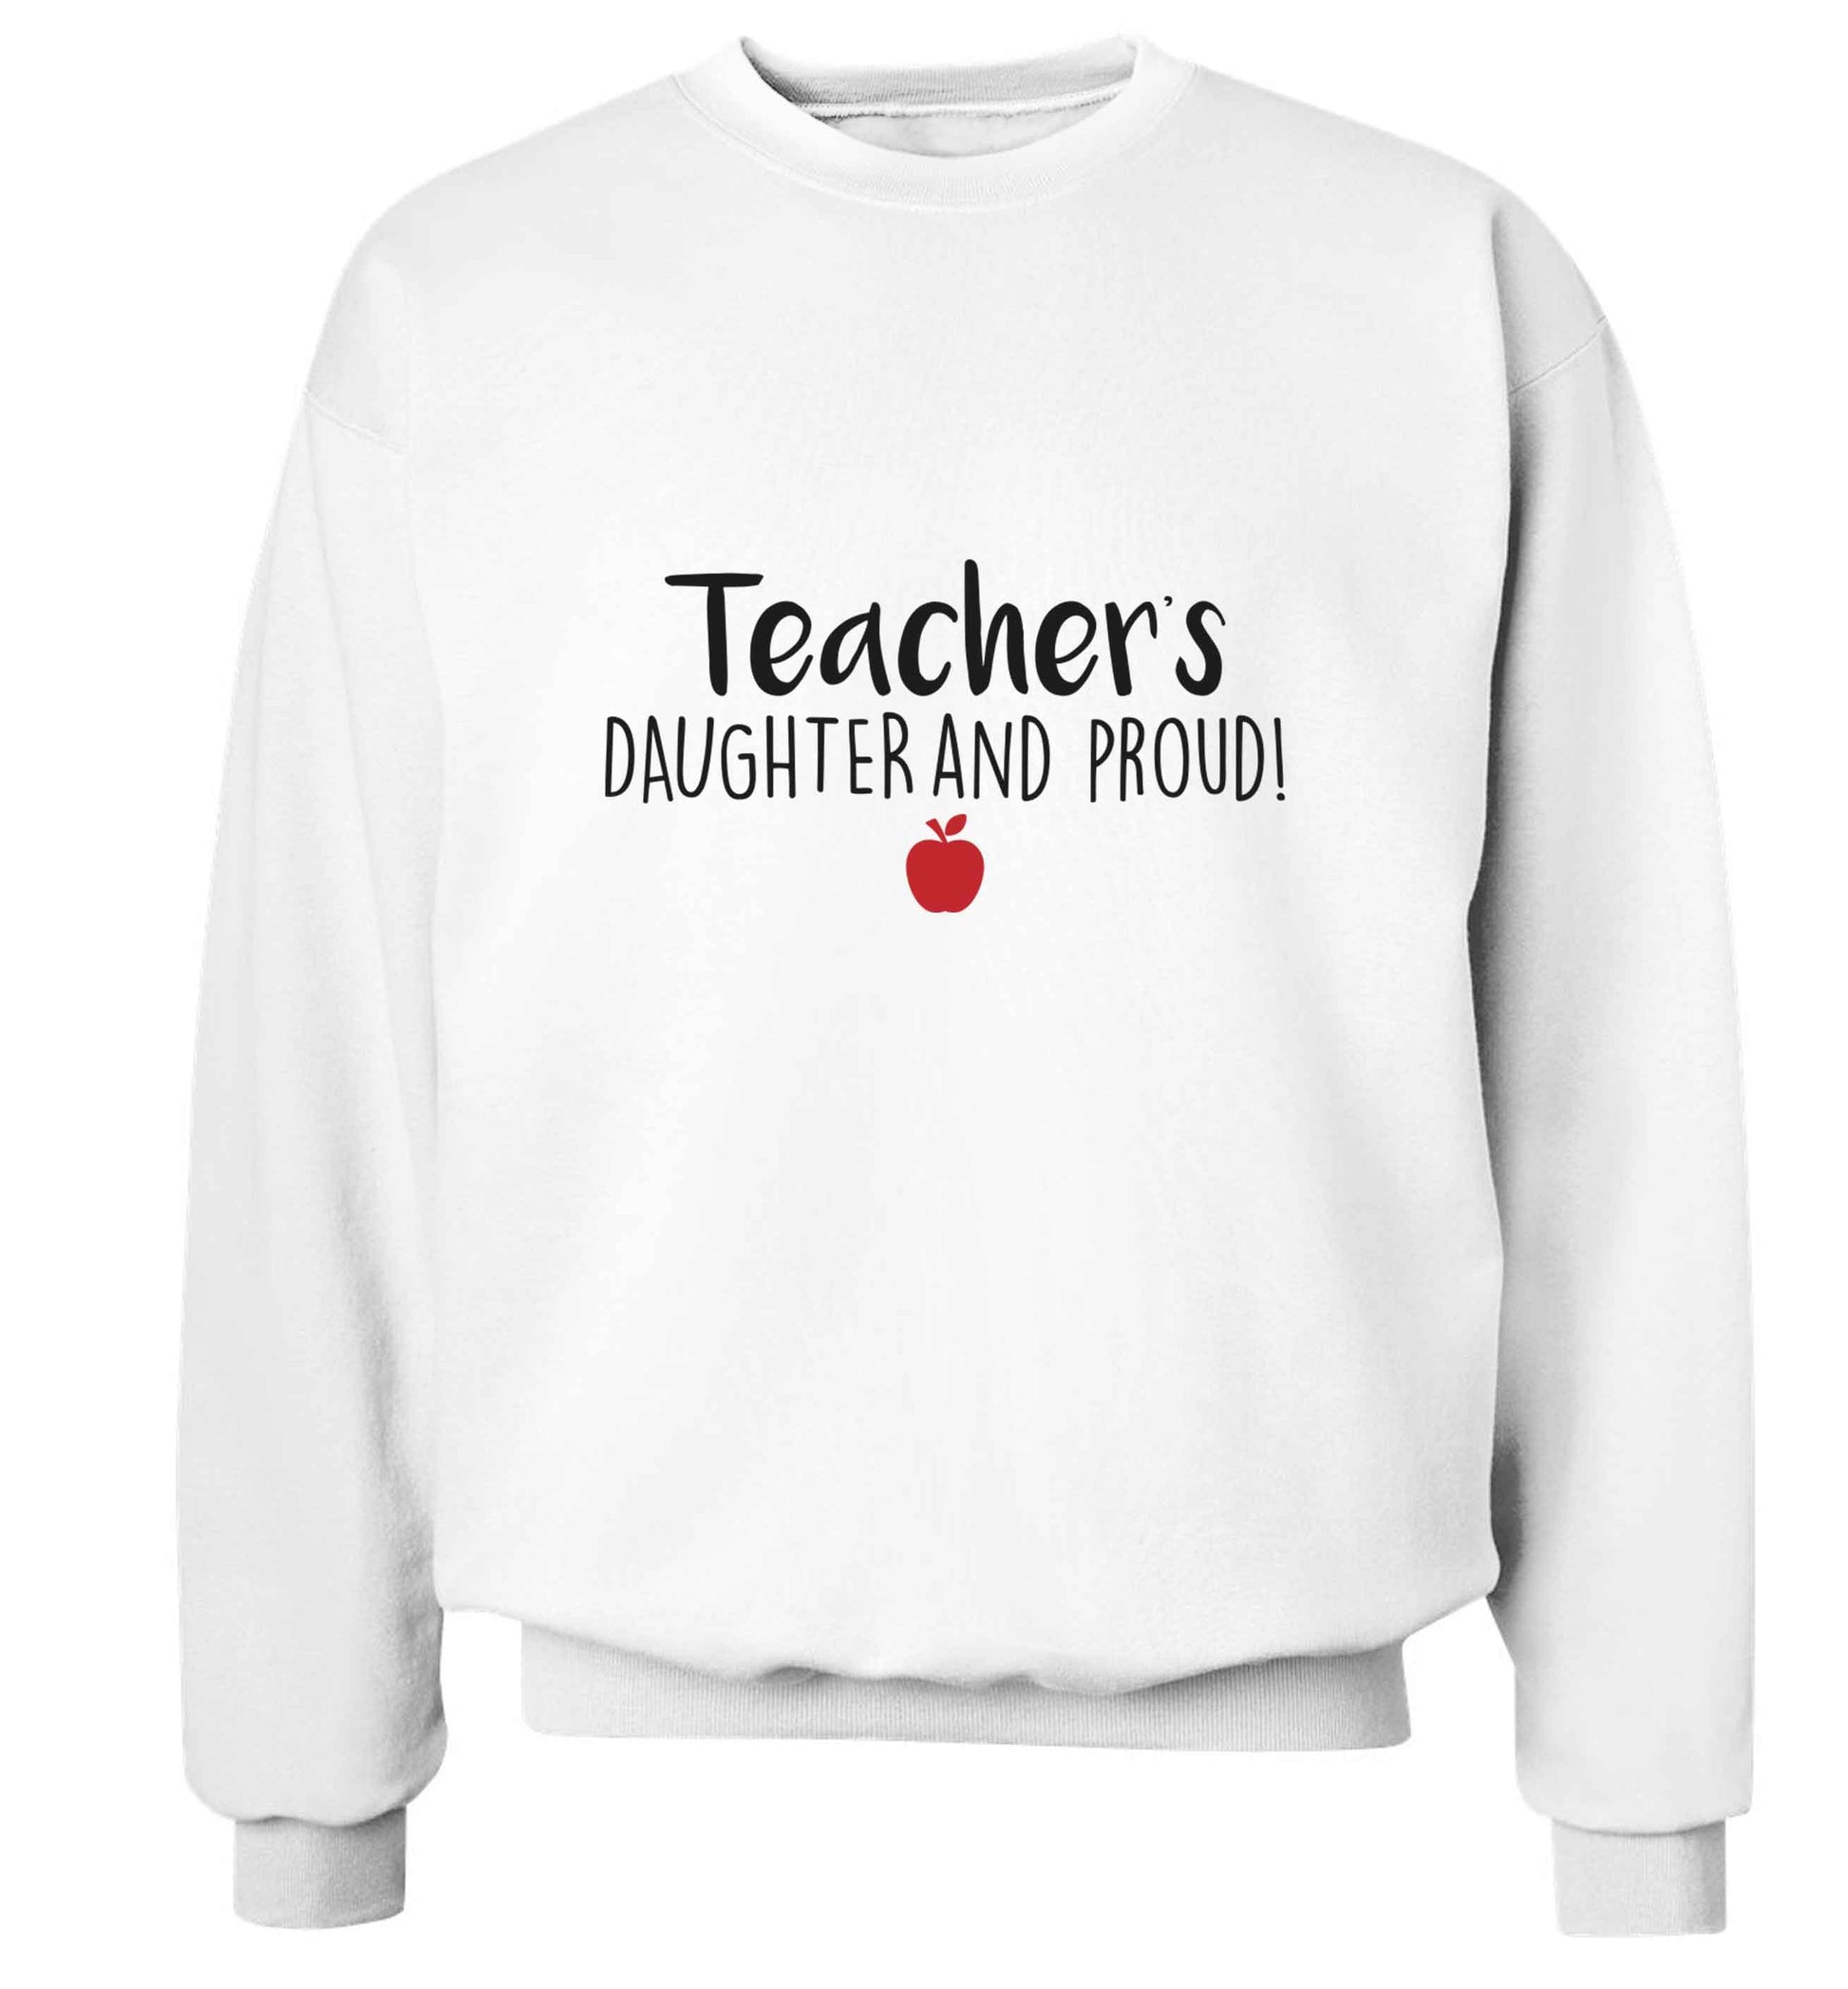 Teachers daughter and proud adult's unisex white sweater 2XL